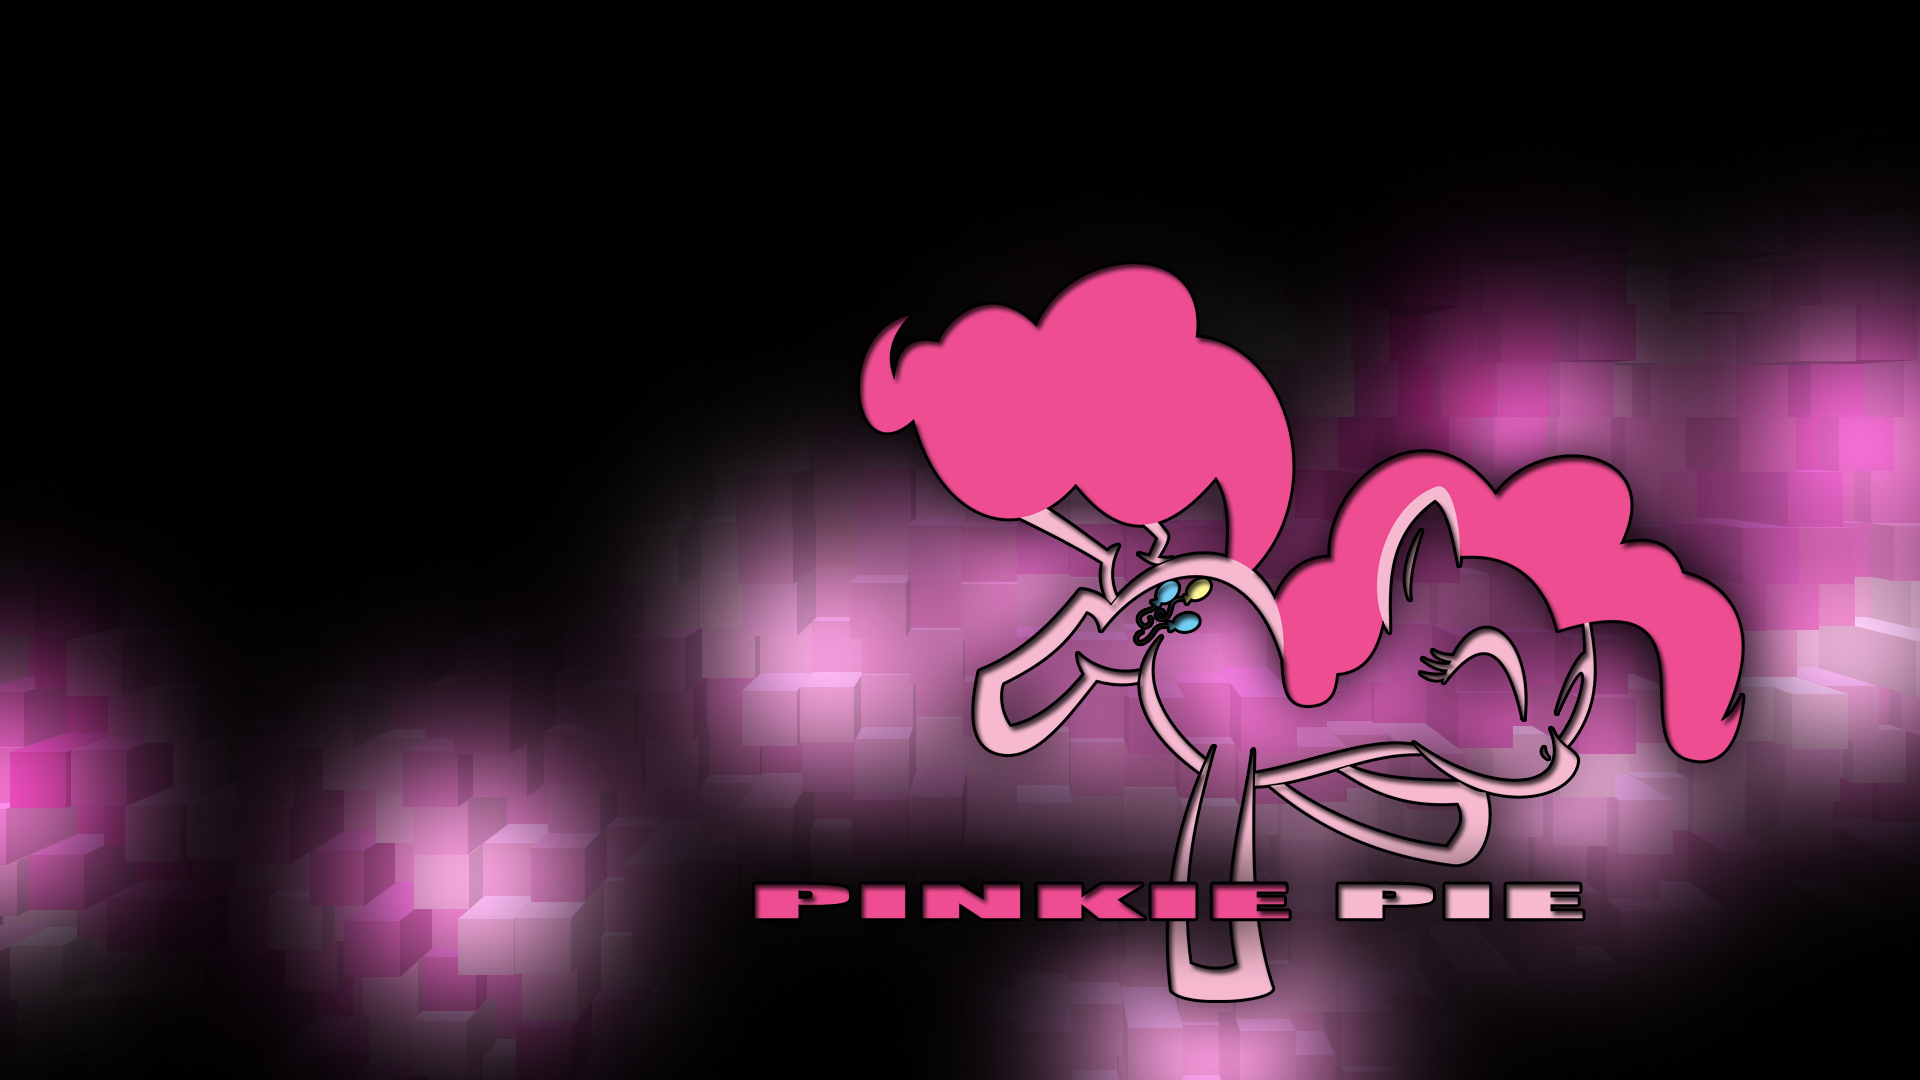 Pinkie Pie Wallpaper by Pappkarton and UP1TER